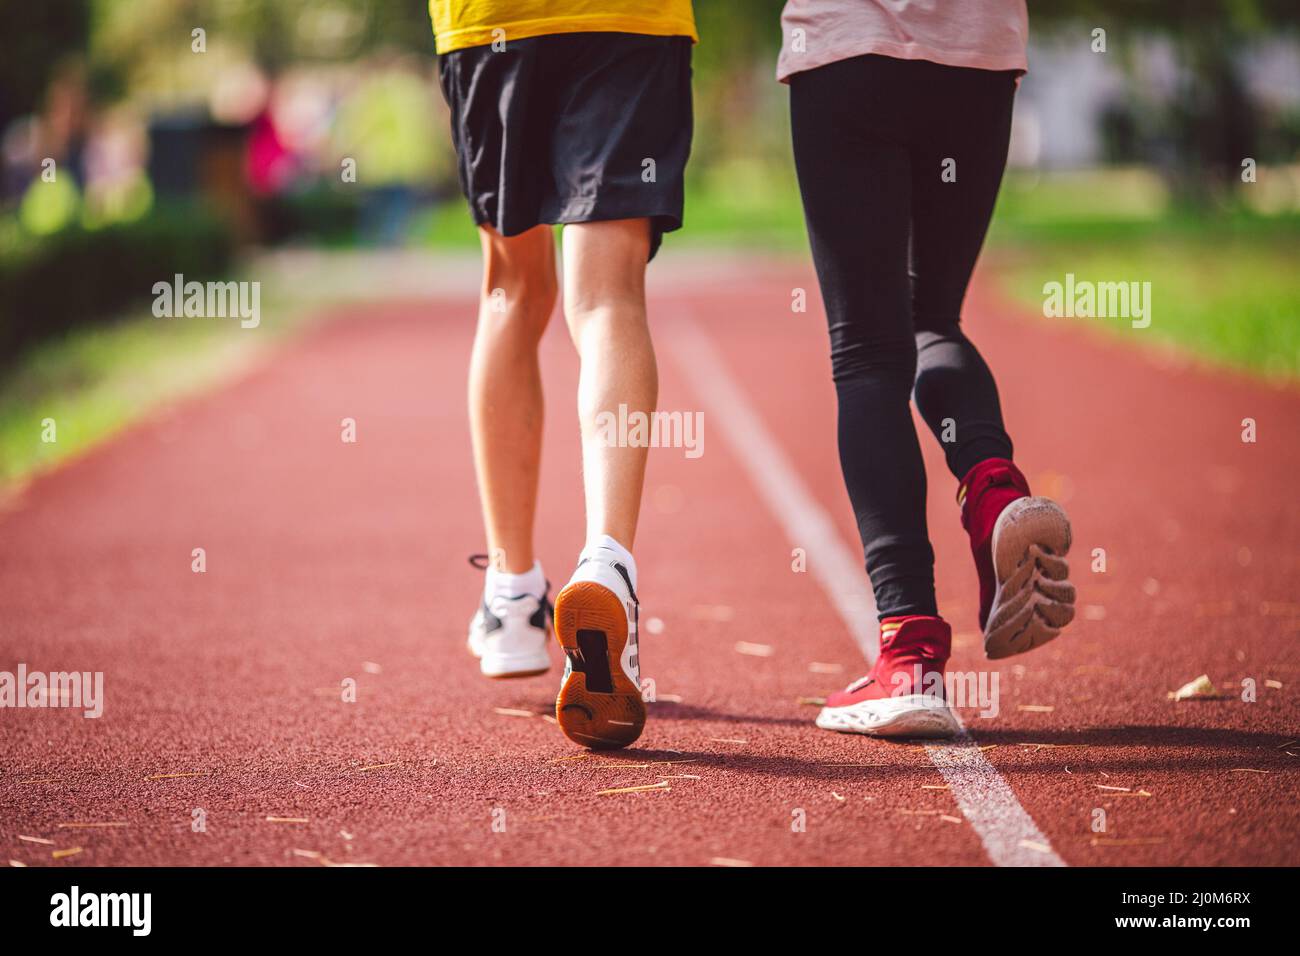 Four legs close-up brother and sister in sneakers run on red treadmill at running stadium back view. Two runners kids side by si Stock Photo